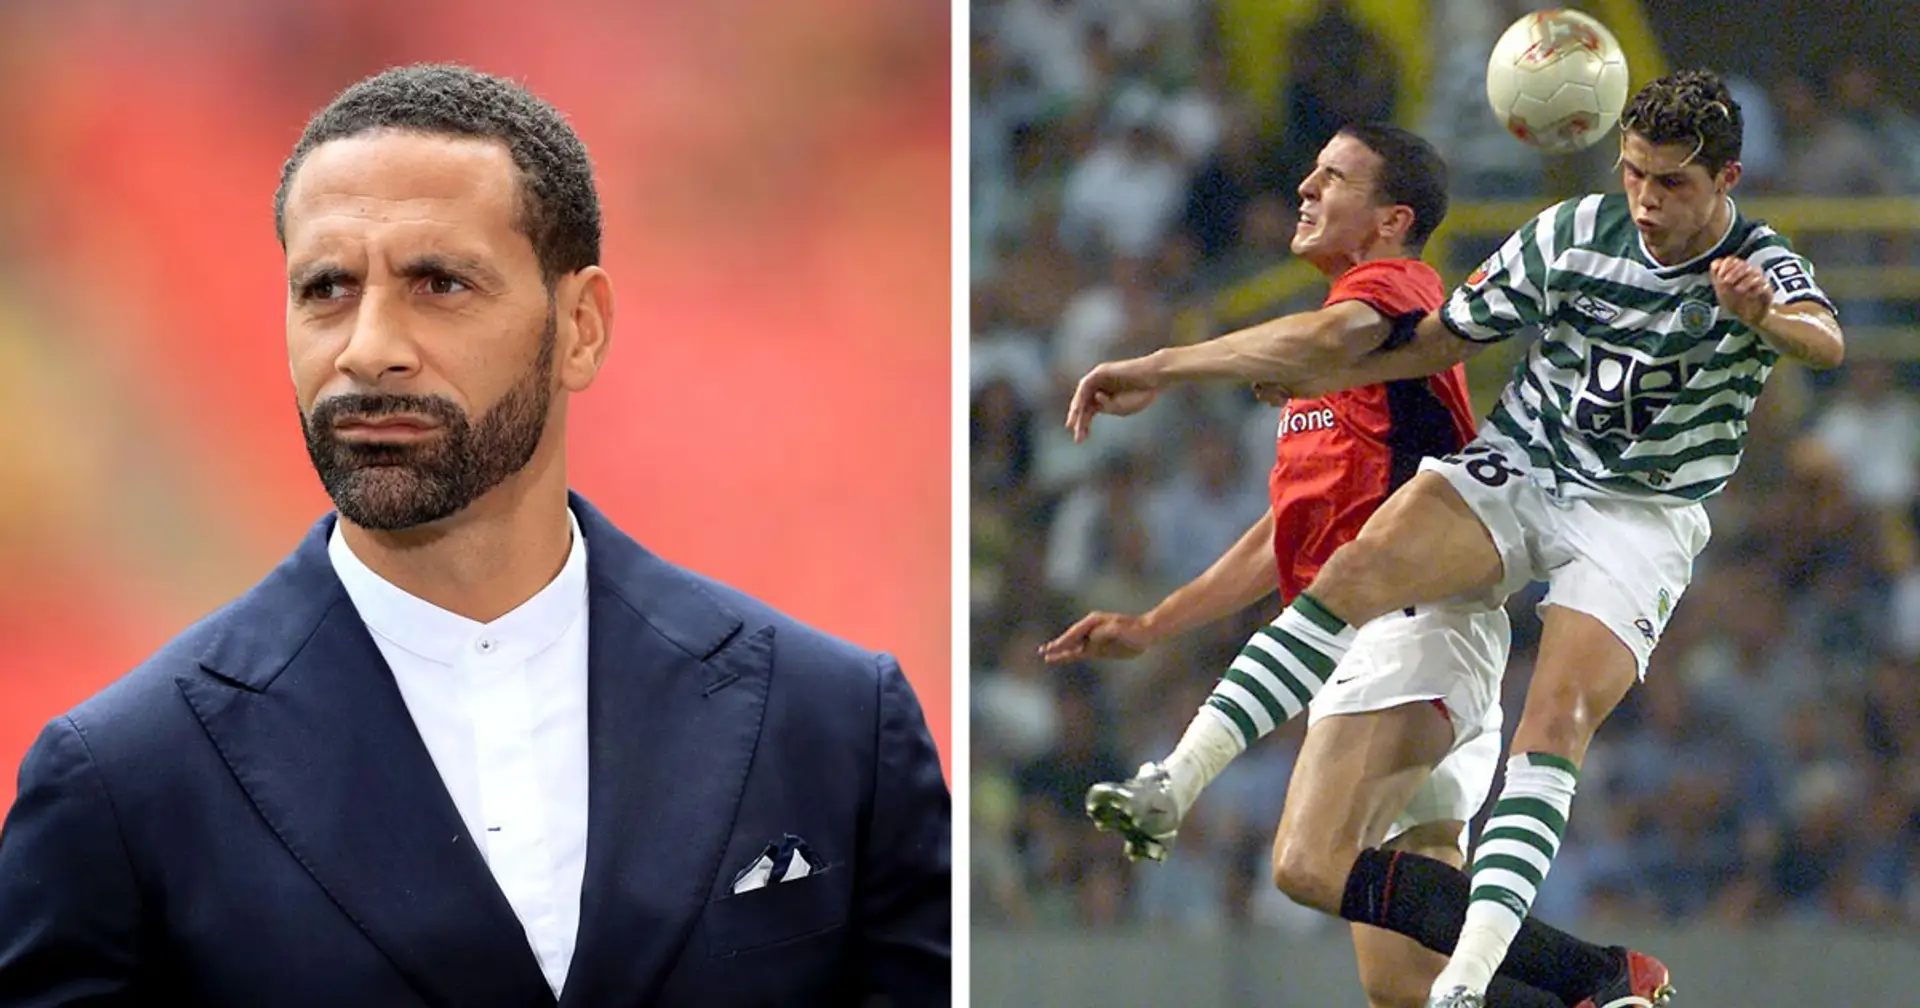 ‘O’Shea must’ve needed an oxygen tank’: Ferdinand reveals how Ronaldo’s masterclass left United defender panting in 2003